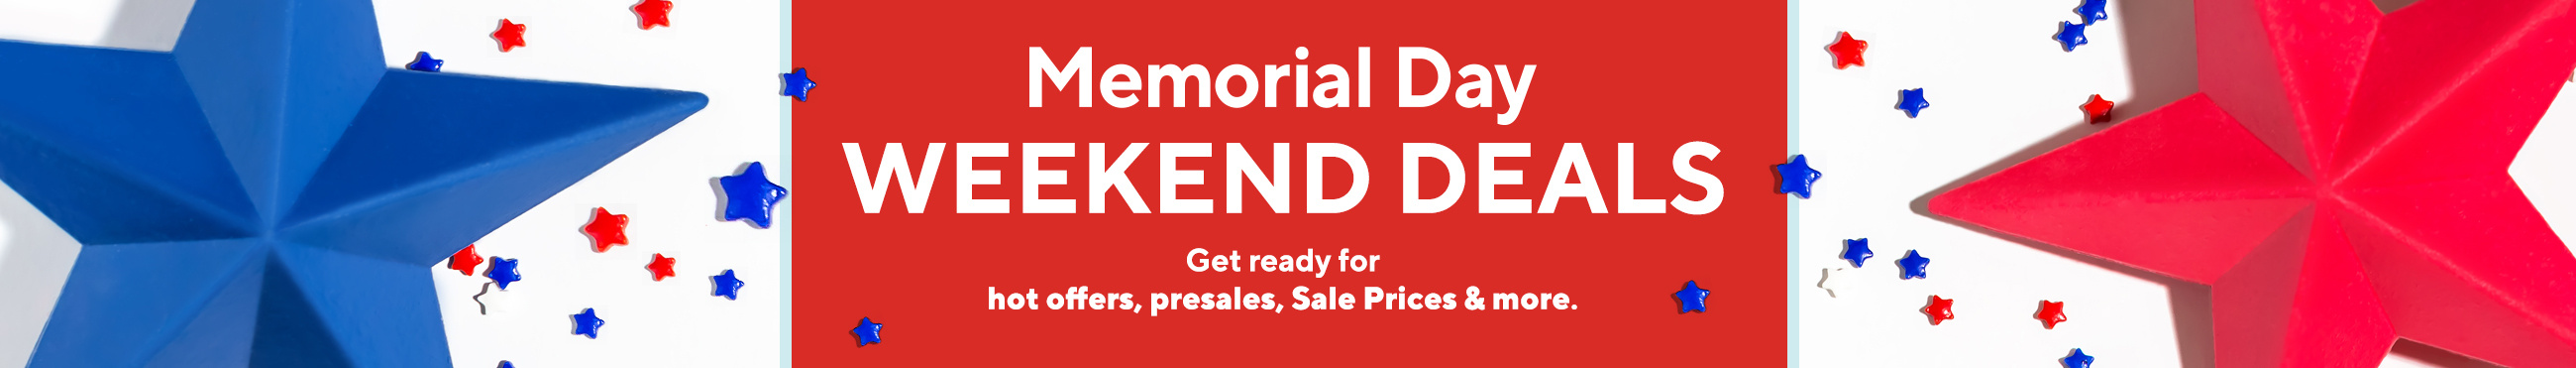 Memorial Day Weekend Deals They're on! Get ready for hot offers, presales, Sale Prices & more.